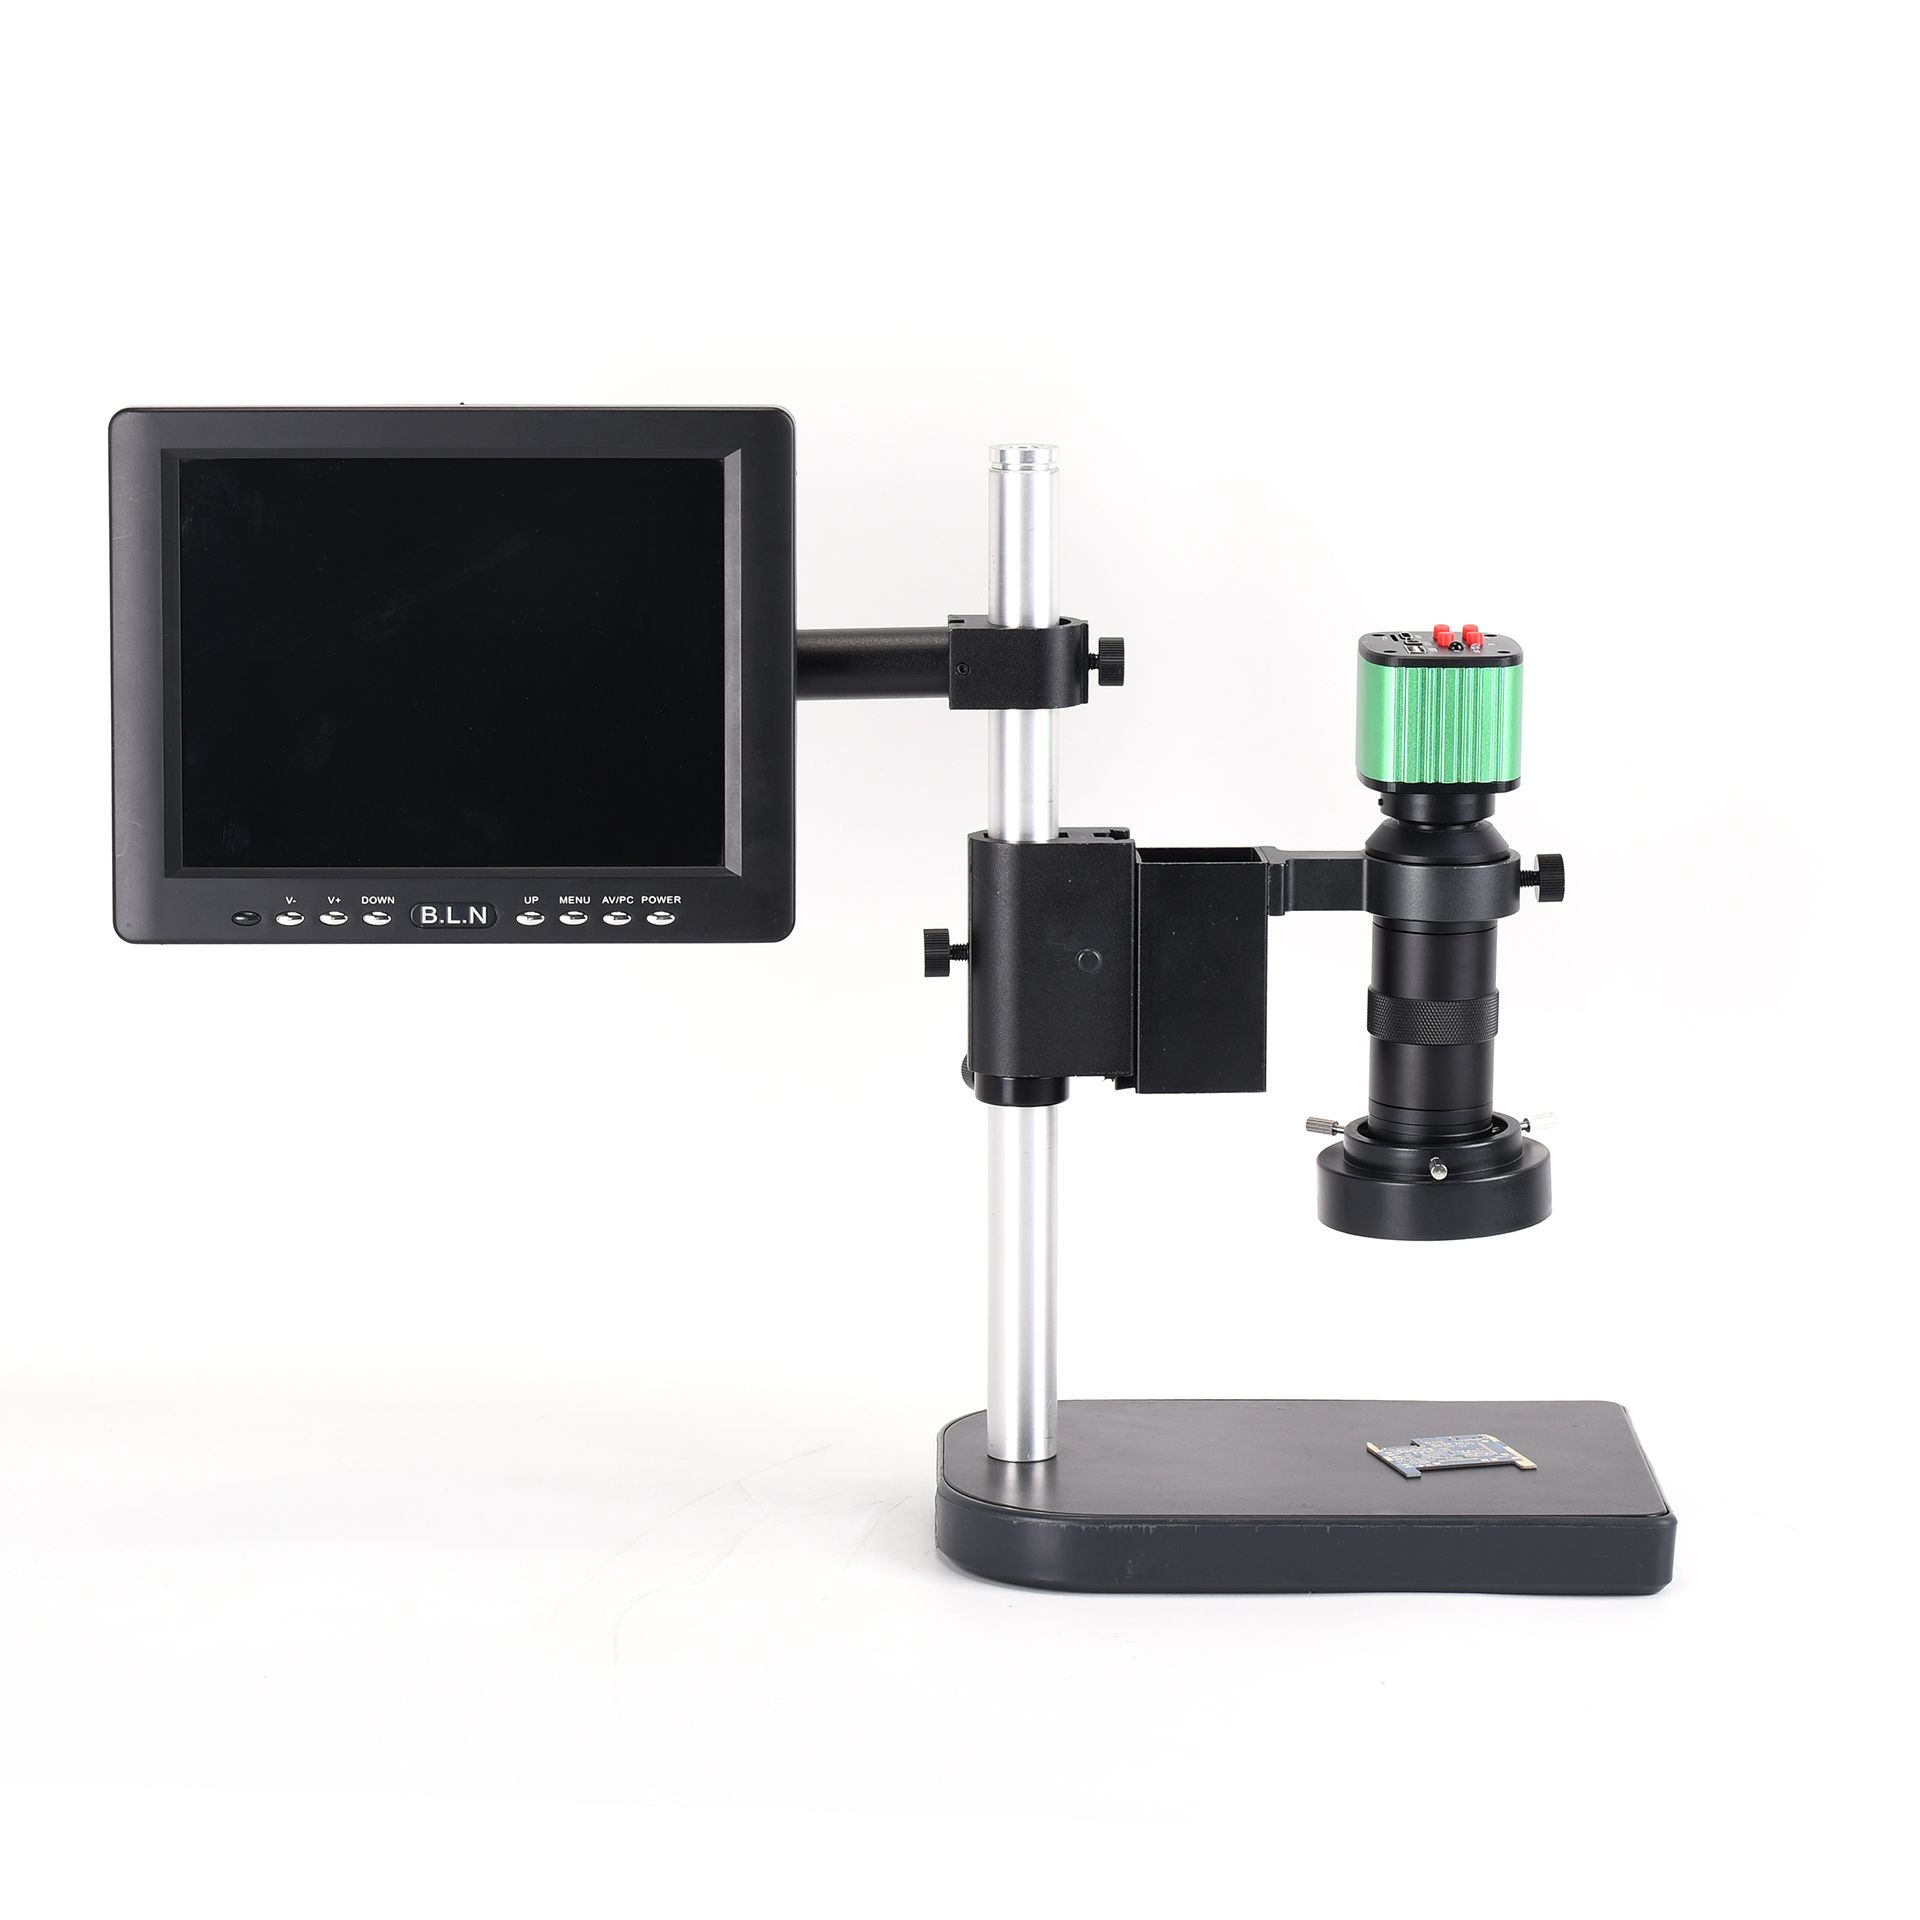 HAYEAR-16MP-1080P-USB-Video-Microscope-Camera-with-C-mount-Lens-40-LED-Light-8-inch-LCD-Monitor-for--1559009